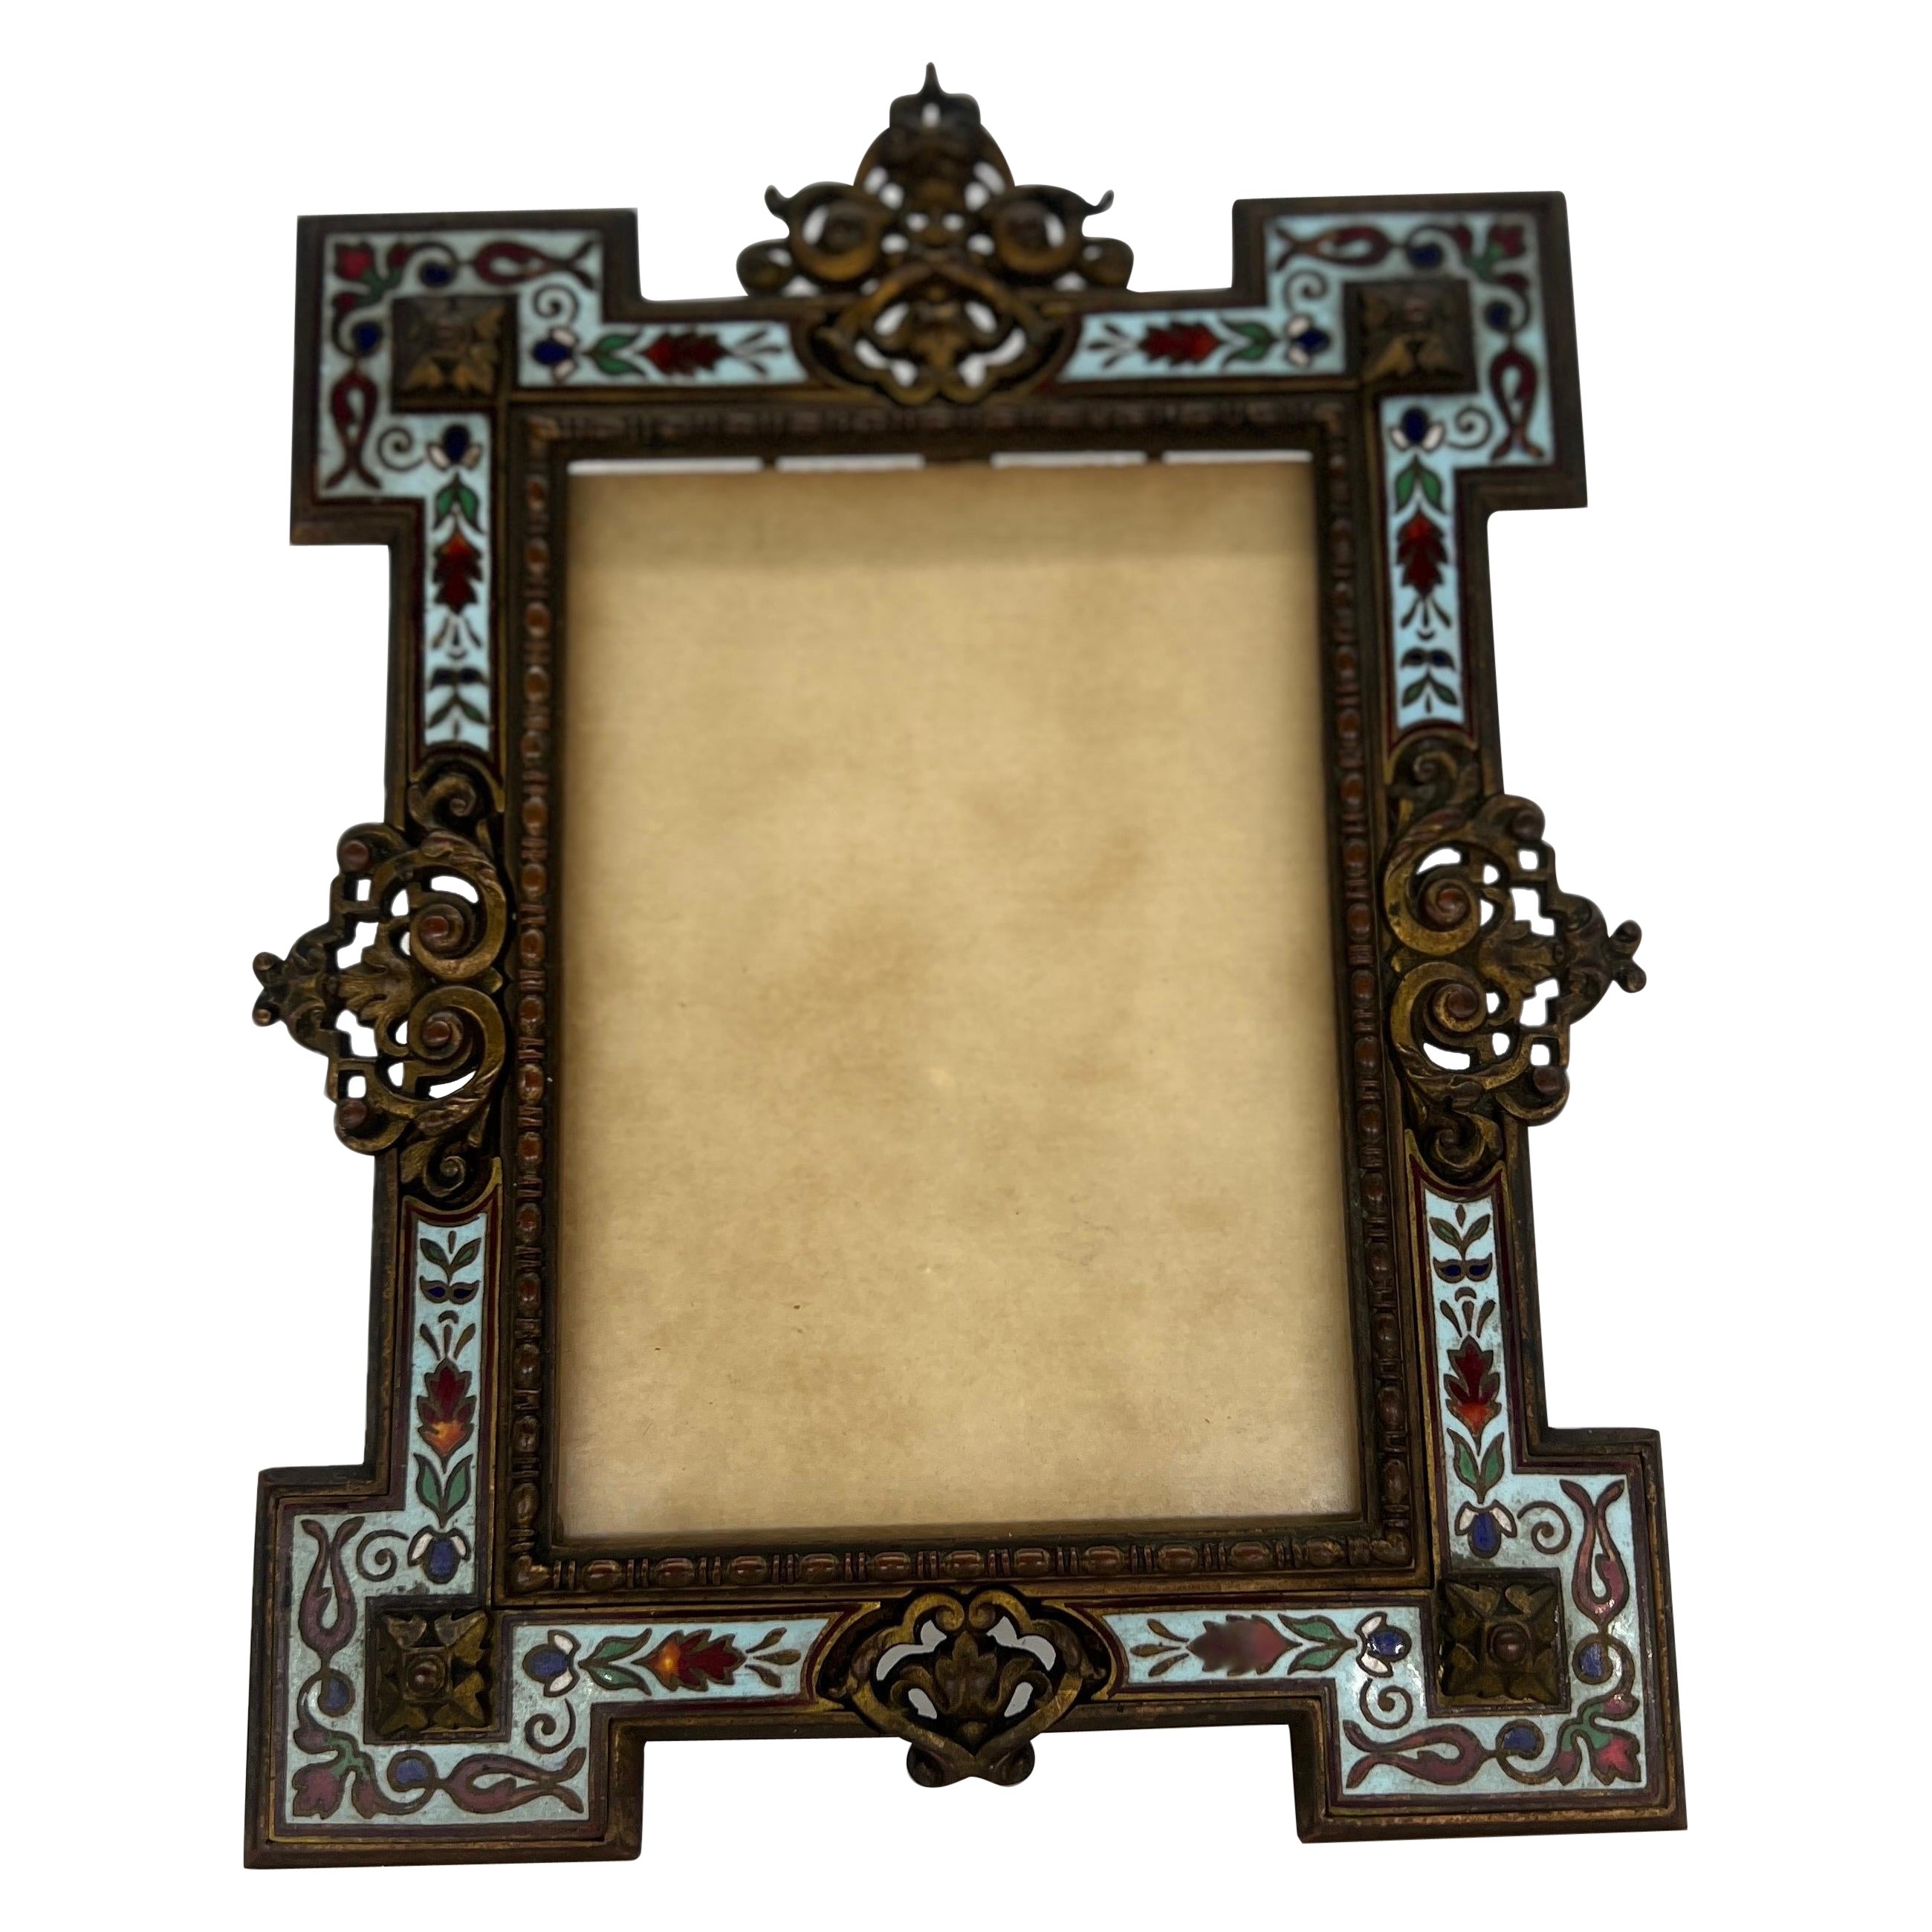 Antique French Champleve Enamel Picture Frame C. 1890